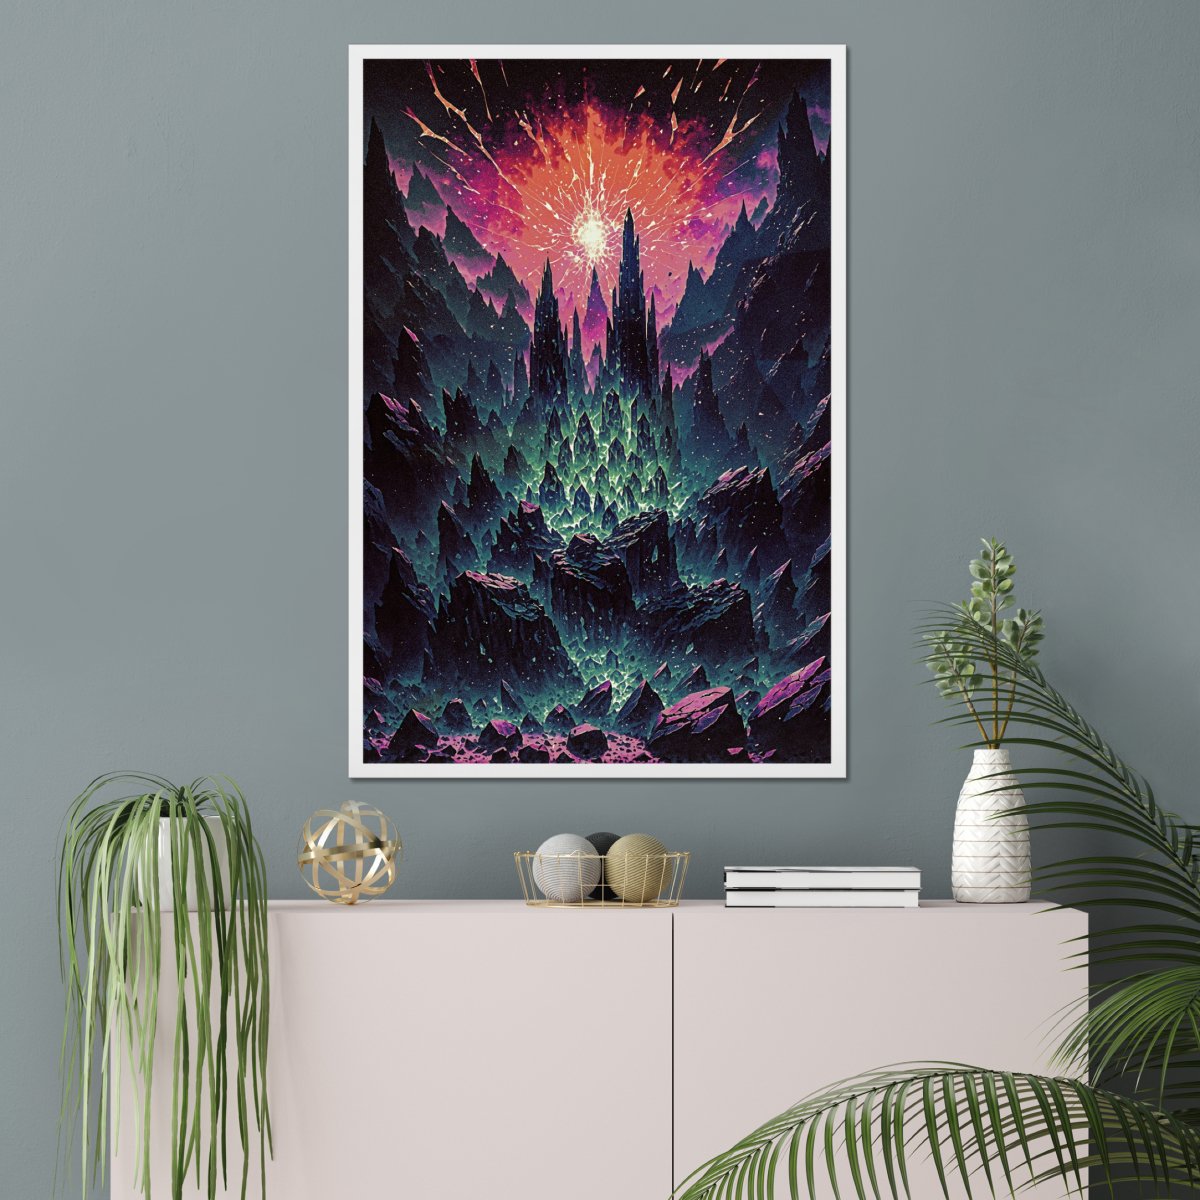 Magnetic shards - Art print - Poster - Ever colorful